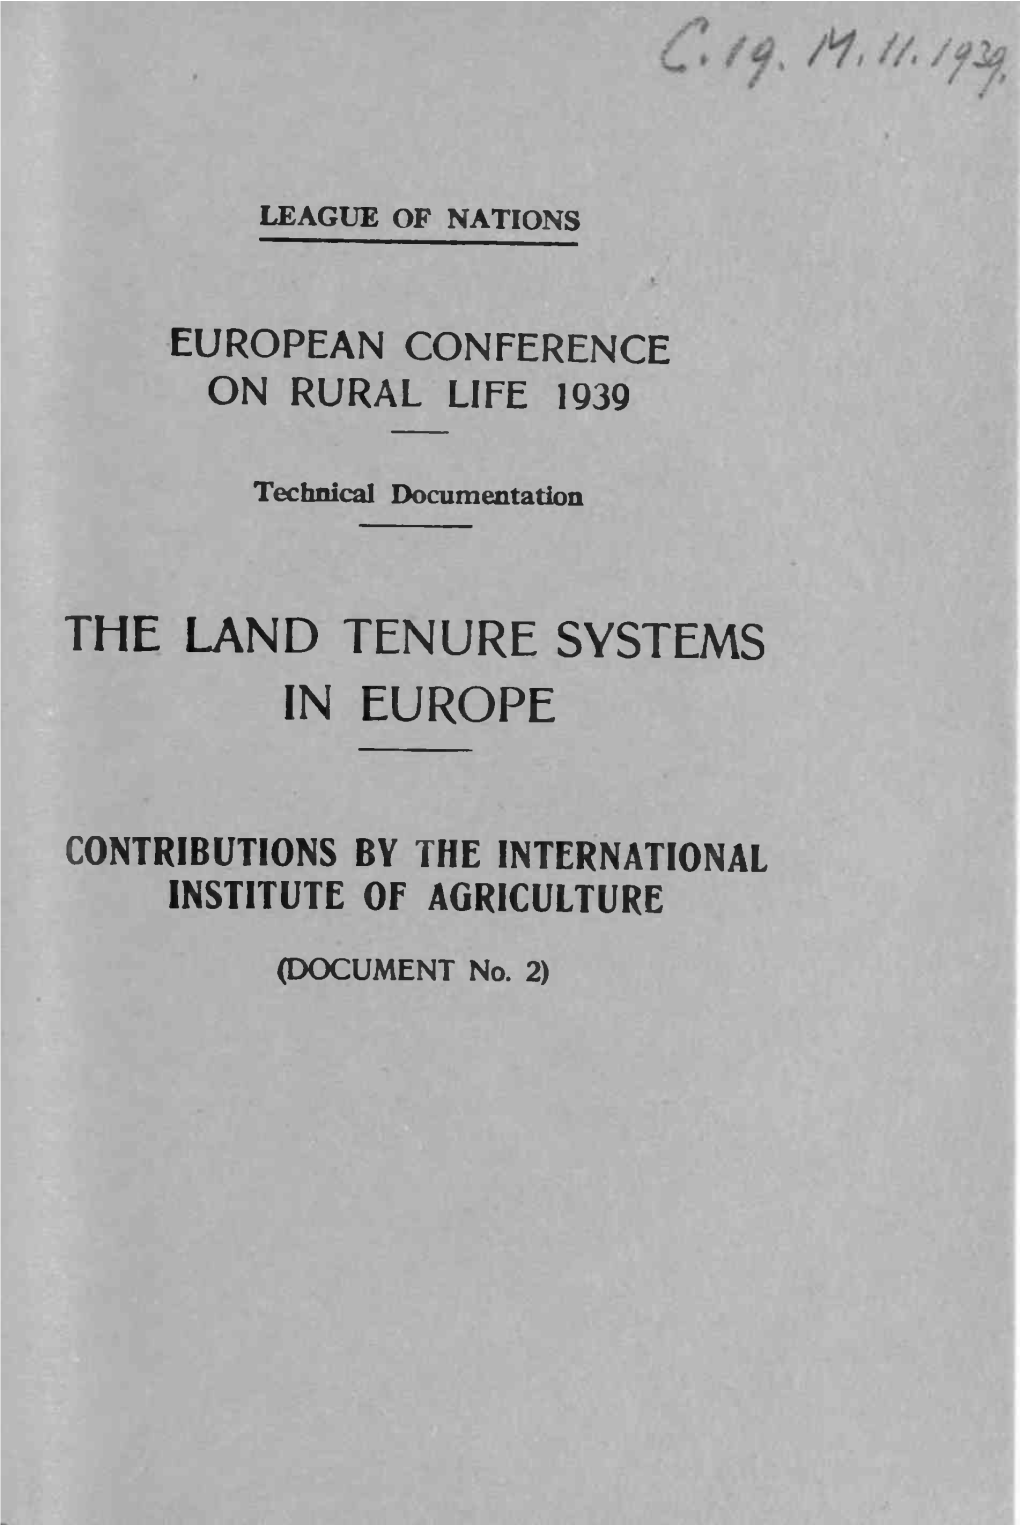 The Land Tenure Systems in Europe